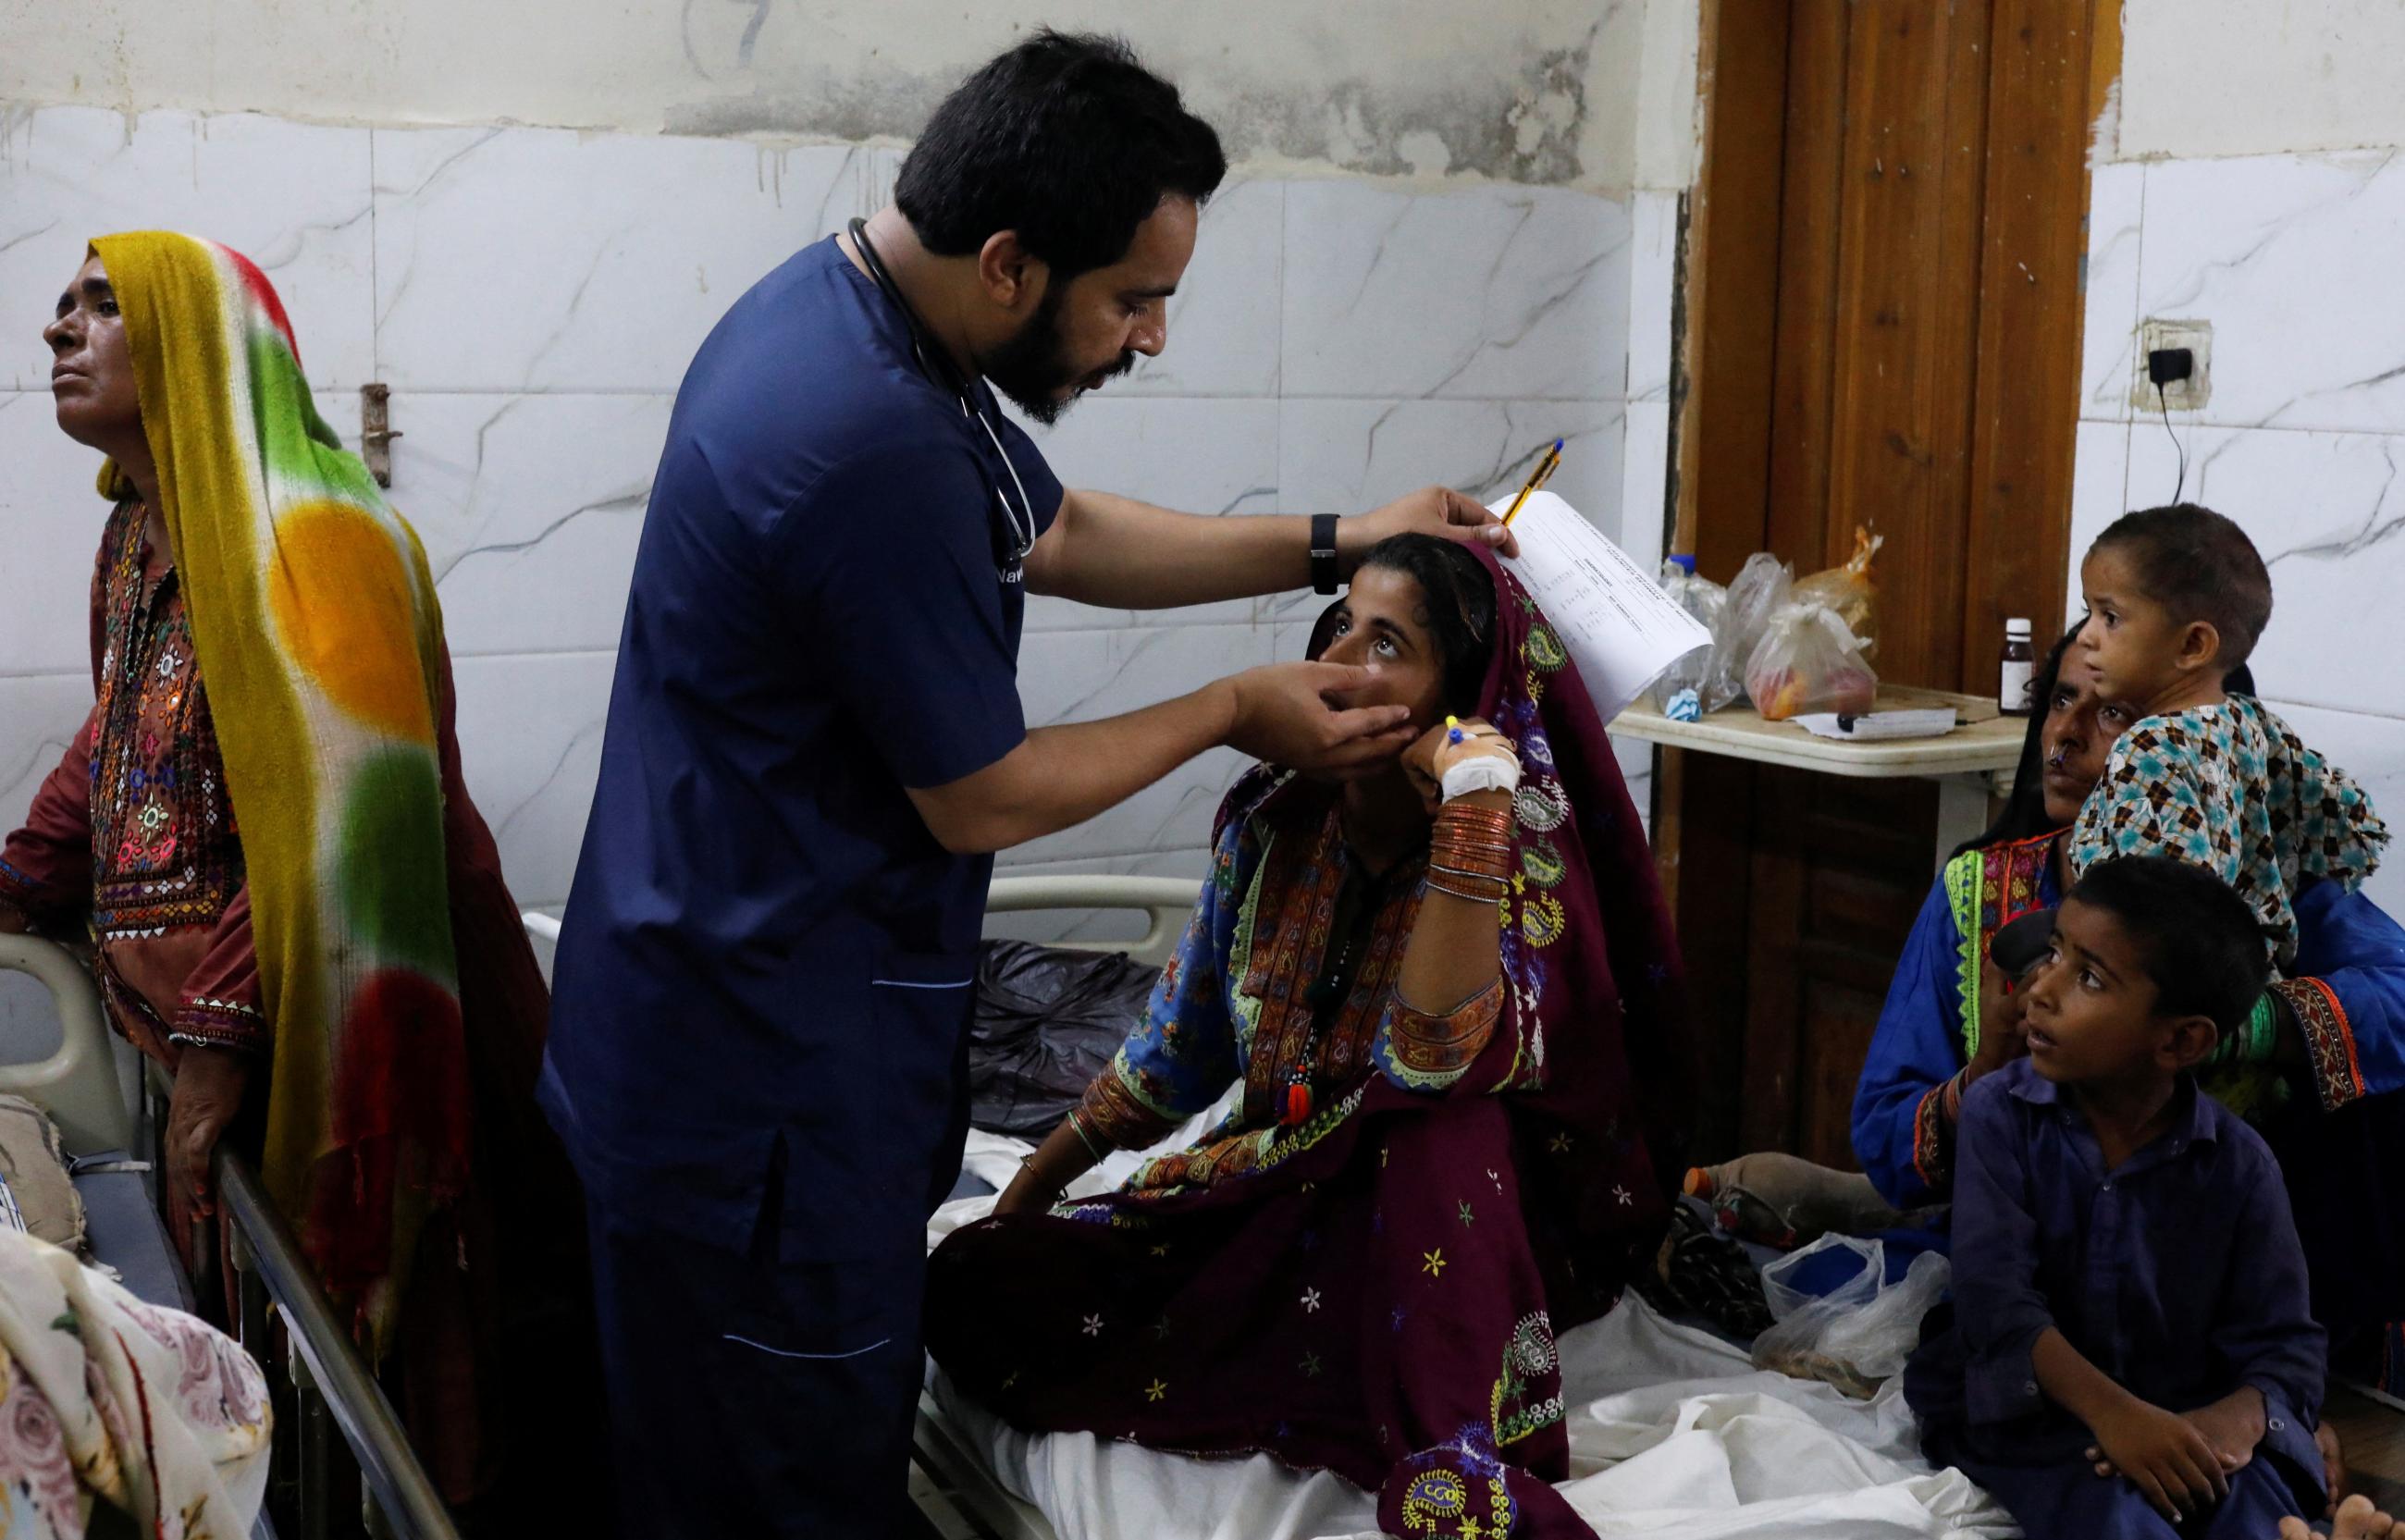 Naveed Ahmed, a doctor, gives medical assistance to flood-affected girl, Hameeda, suffering from malaria, at Sayed Abdullah Shah Institute of Medical Sciences in Sehwan, Pakistan September 29, 2022.